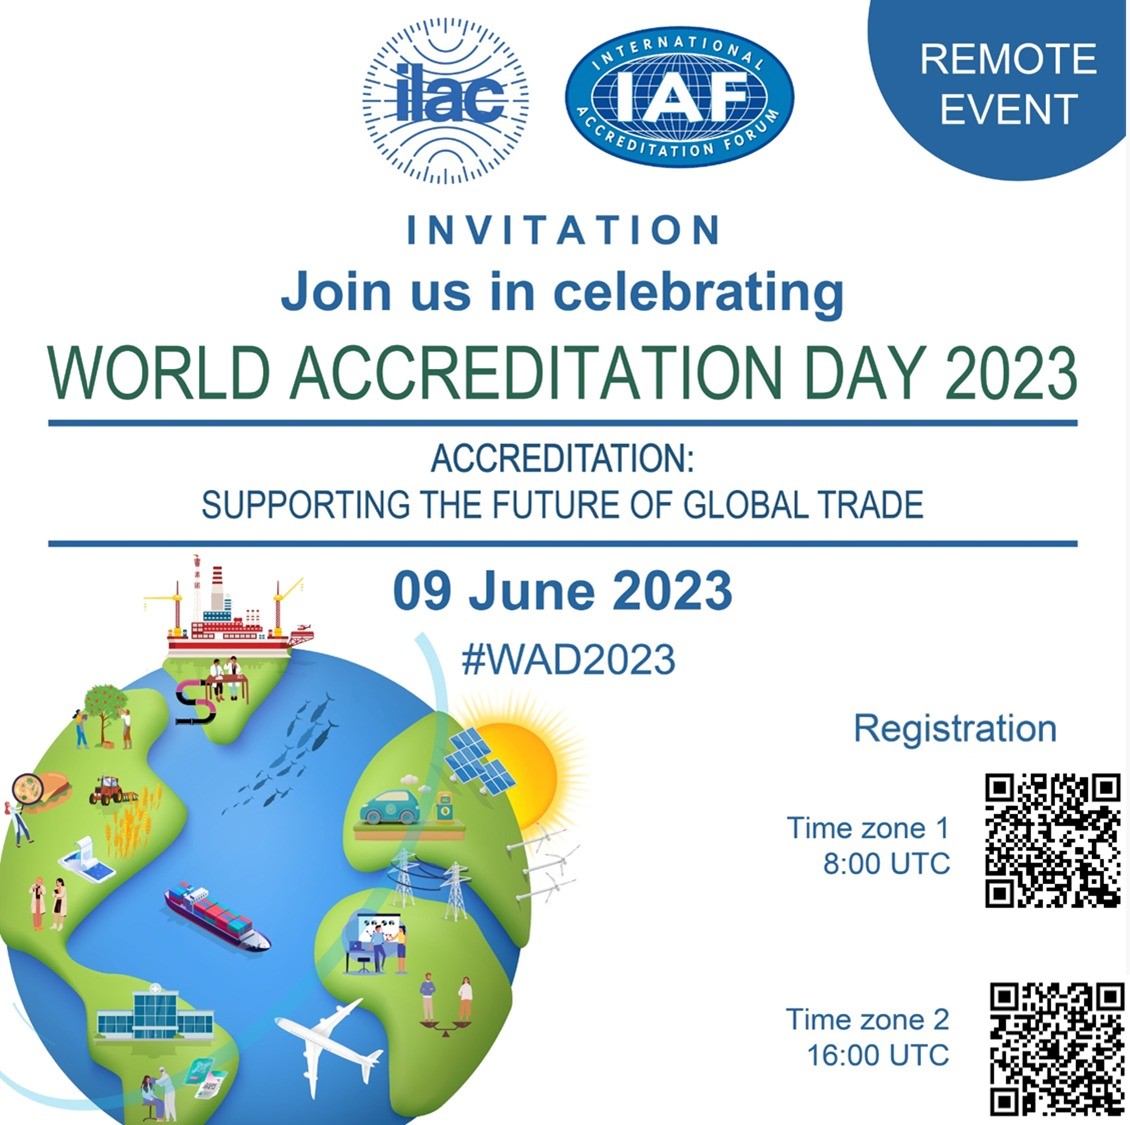 @ILAC_Official and @IAF_Global are holding an online event for #WAD2023! Register using the links or QR codes below to join us on 09 June⬇️

Time Zone 1 (8:00 UTC)

us02web.zoom.us/j/84902434372?…

Time Zone 2 (16:00 UTC)
us02web.zoom.us/j/87964483670?…